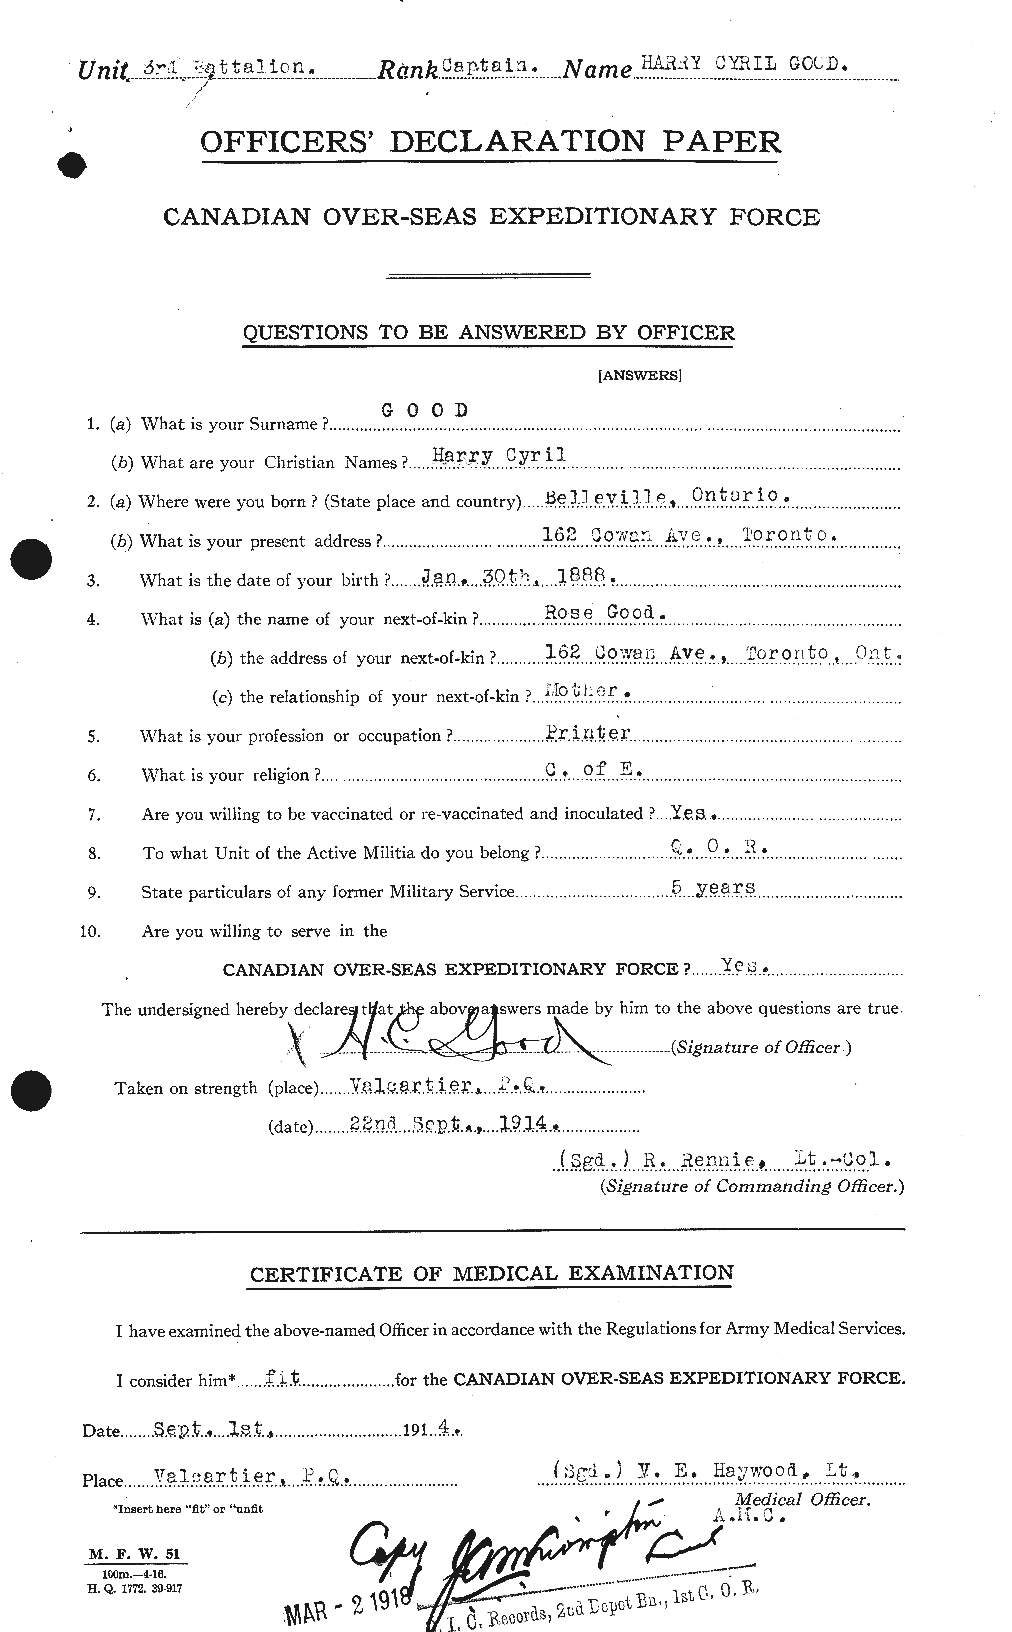 Personnel Records of the First World War - CEF 354961a